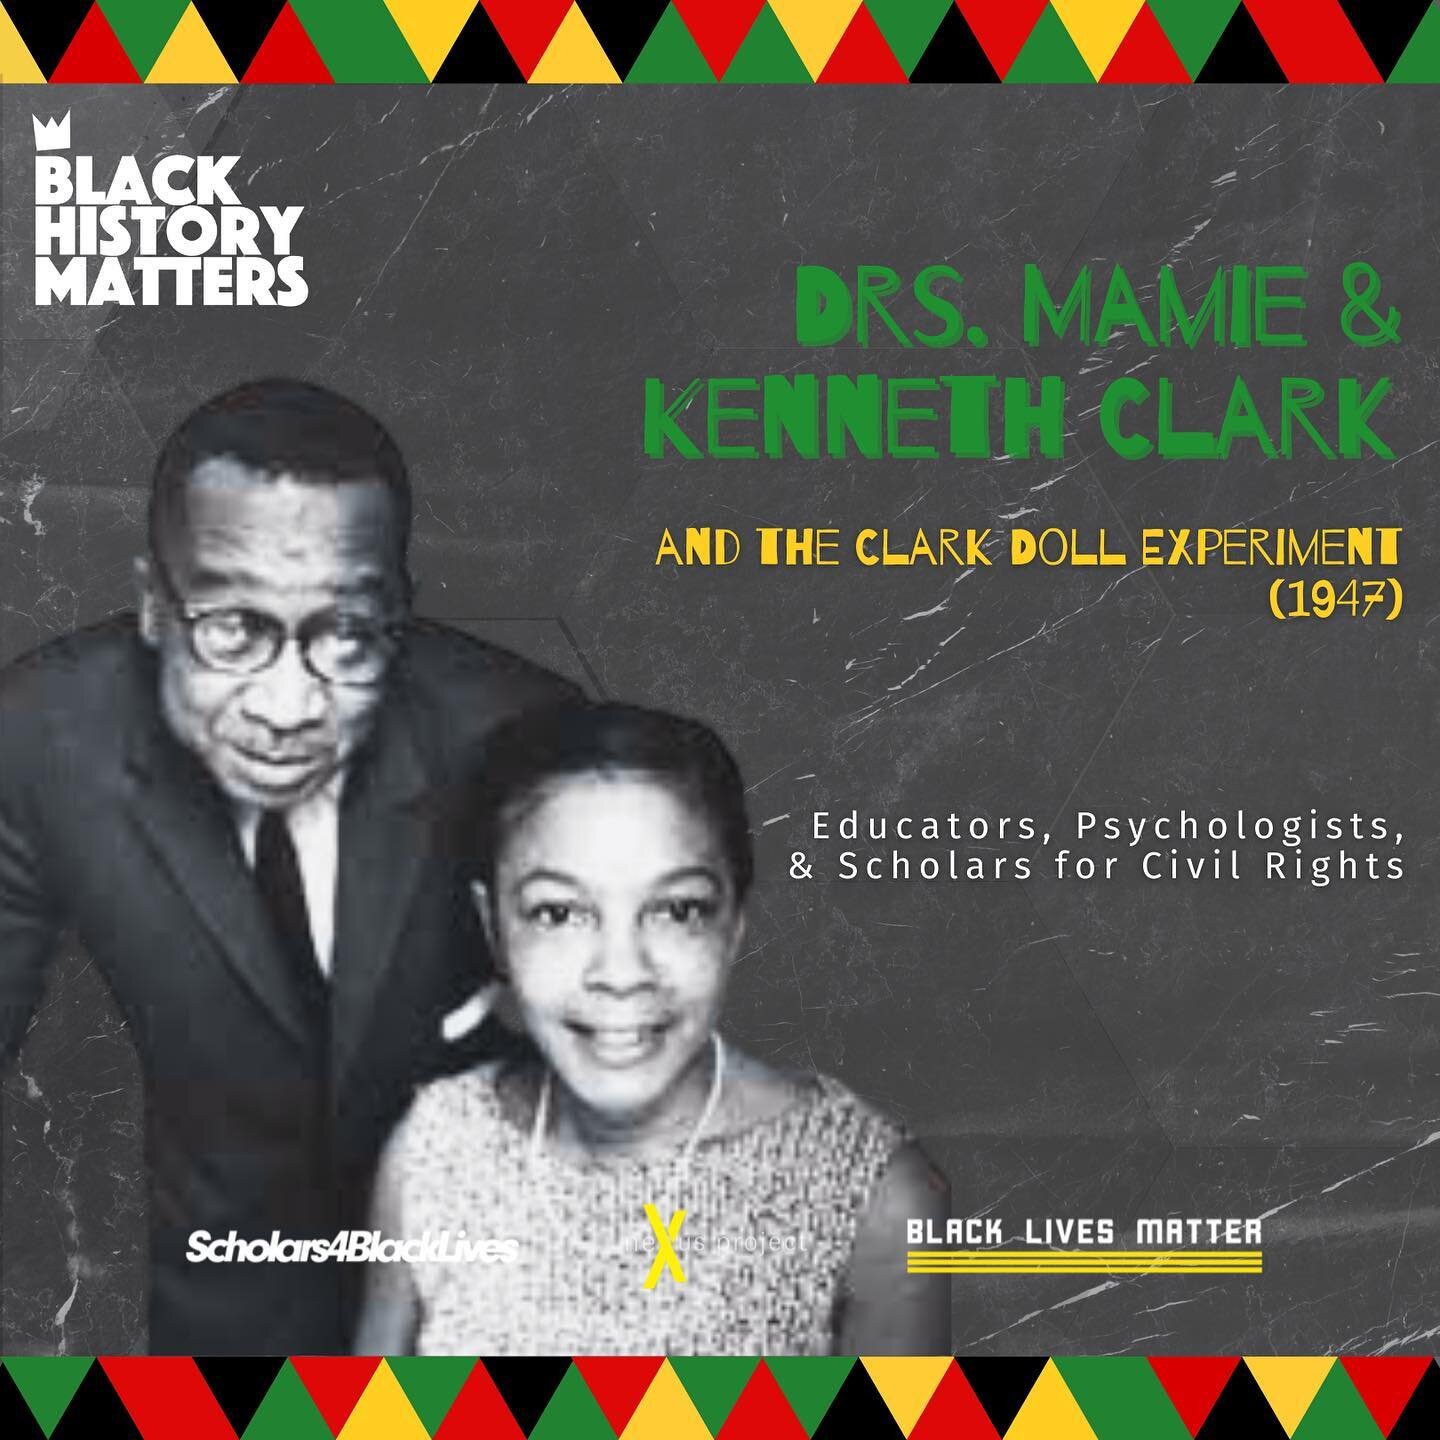 &ldquo;A racist system inevitably destroys and damages human beings; it brutalizes and dehumanizes them, blacks and whites alike.&rdquo; - Mamie and Kenneth Clark.

                The research, creativity, and commitment to the Black community, civil rights and hum